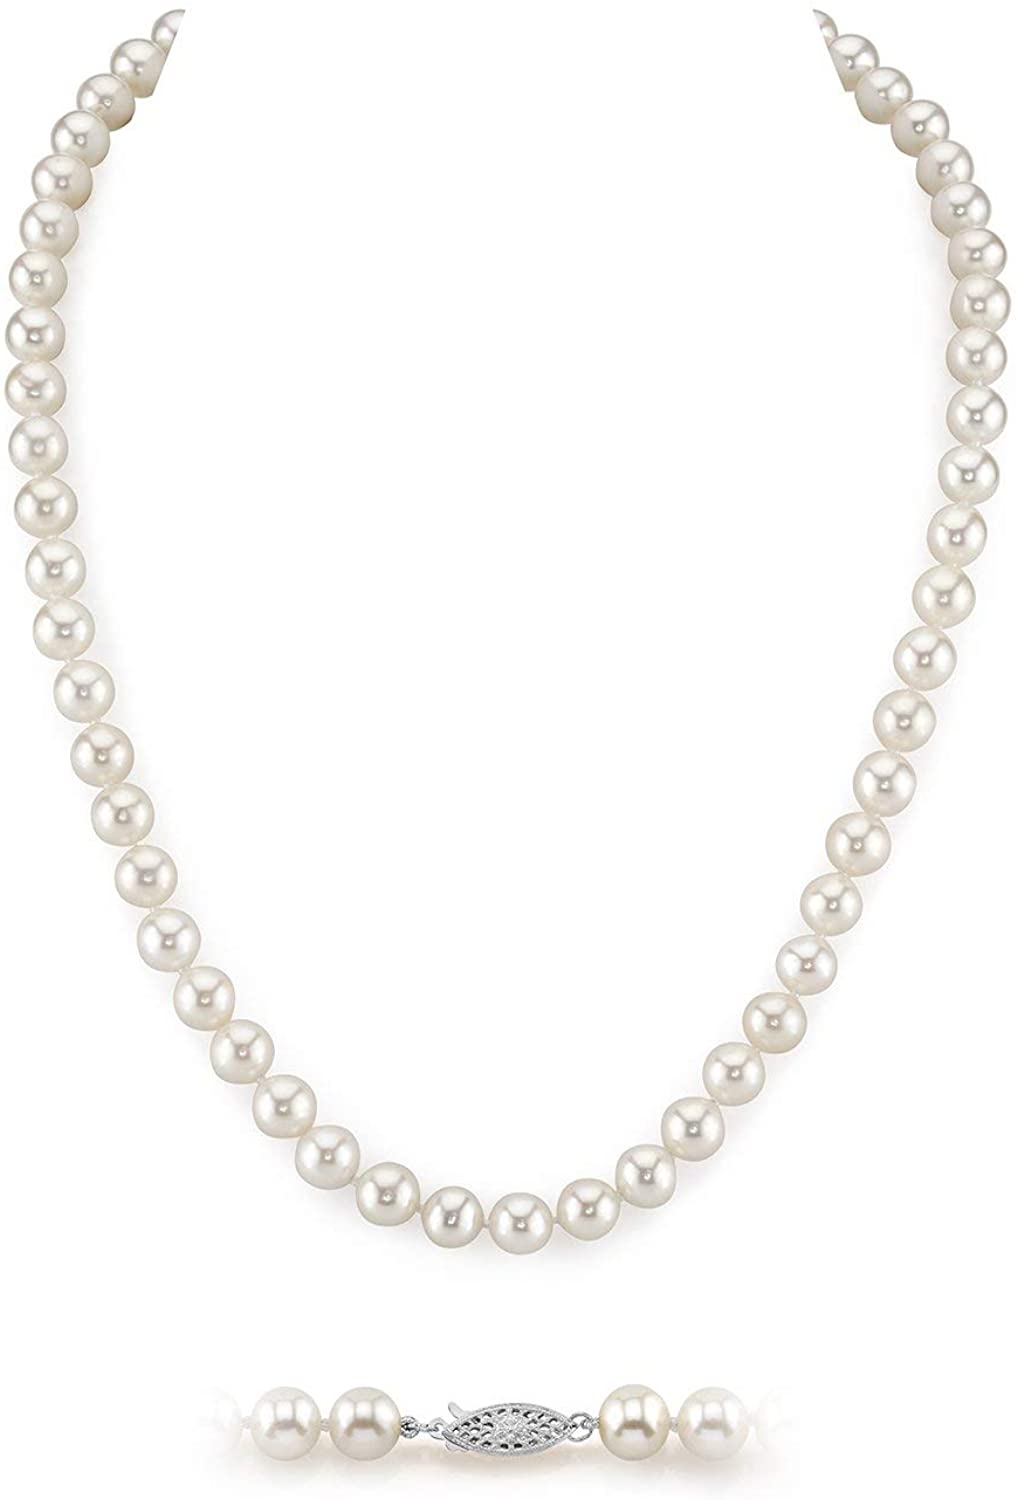 THE PEARL SOURCE White Freshwater Pearl Necklace for Women - Pearl Strand Necklace | Long Pearl Necklace with Genuine Cultured Pearls, 6.5mm-11mm